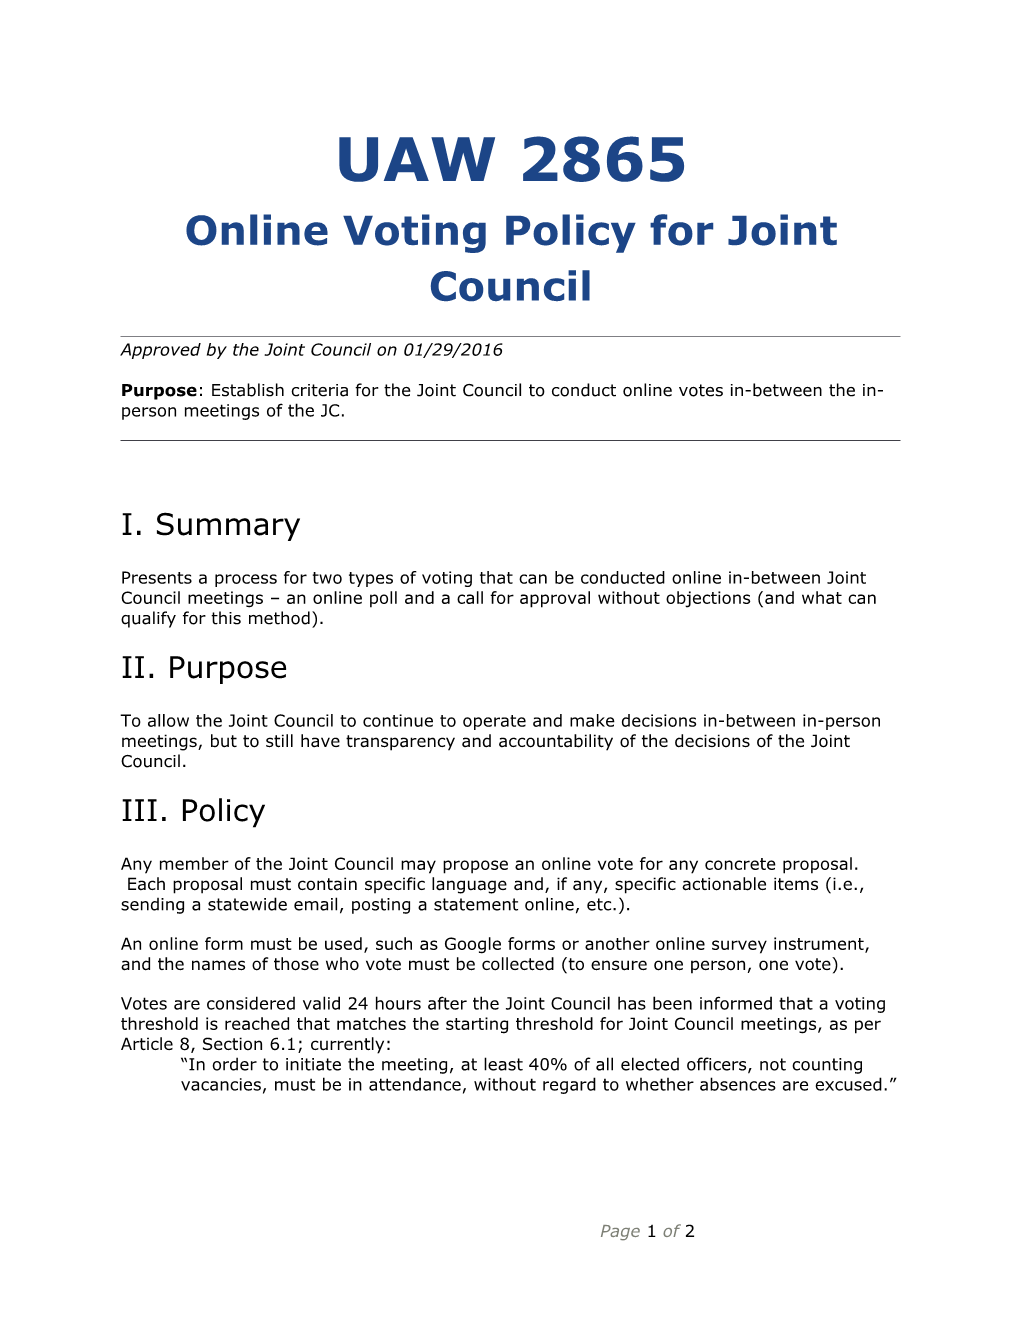 Online Voting Policy for Joint Council